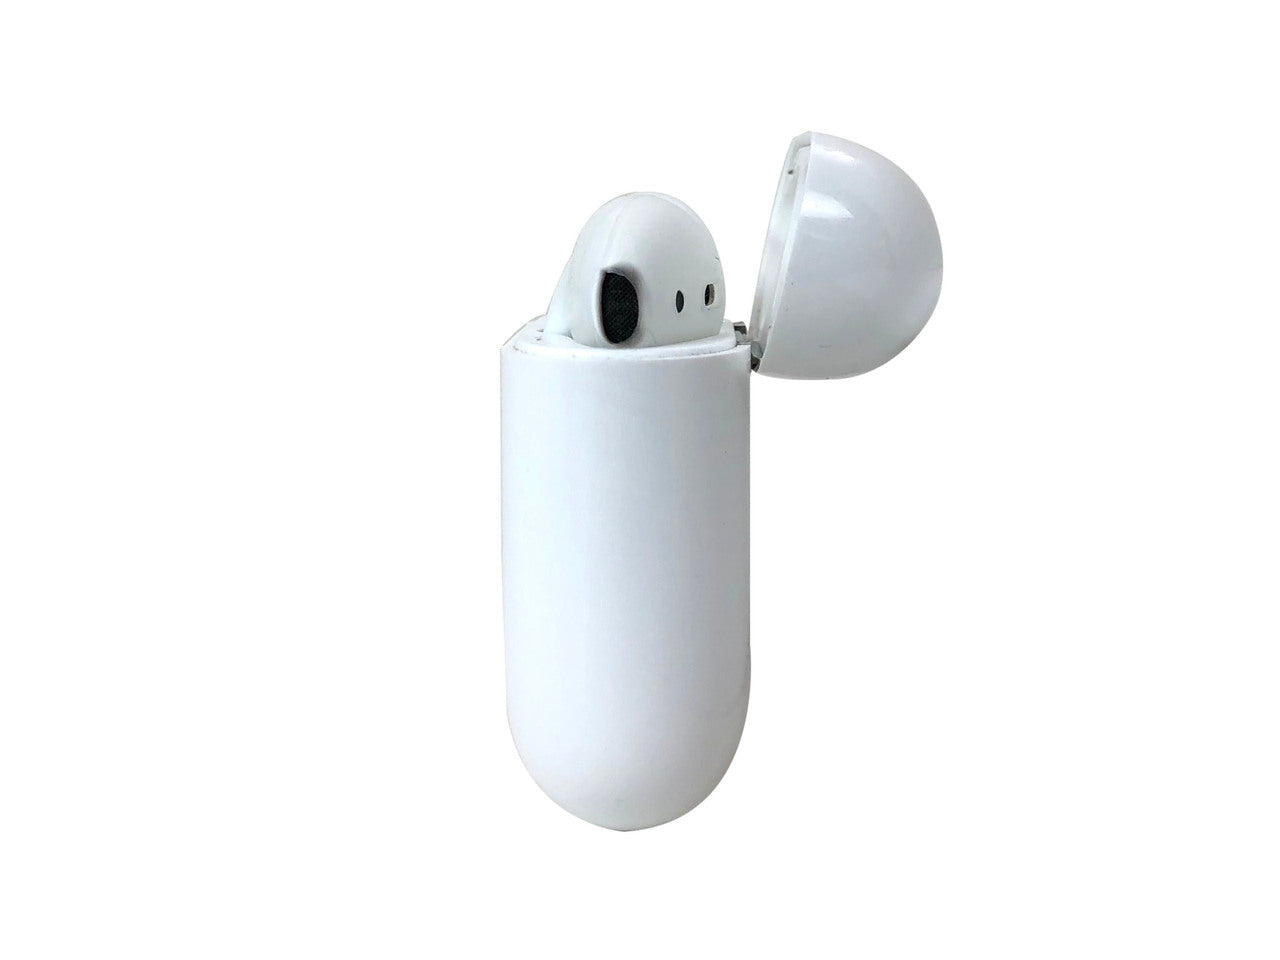 AERZ - AirPods & Apple Earbuds Skins | GHOST (Clear)

* AERZ is a simple comfortable AirPod and Apple Earbud 2.0 solution that improves the sound quality and comfort of your Apple AirPods and Apple Earbud 2.0
    * Soft high quality silicone cover skins improve the comfort of Apple AirPods and Apple Earbuds 2.0 allowing you to wear your AirPods or Earbuds for hours on end without discomfort
    * AERZ dramatically improves the audio quality of Apple AirPods and Apple Earbuds 2.0 by air sealing AirPods and E